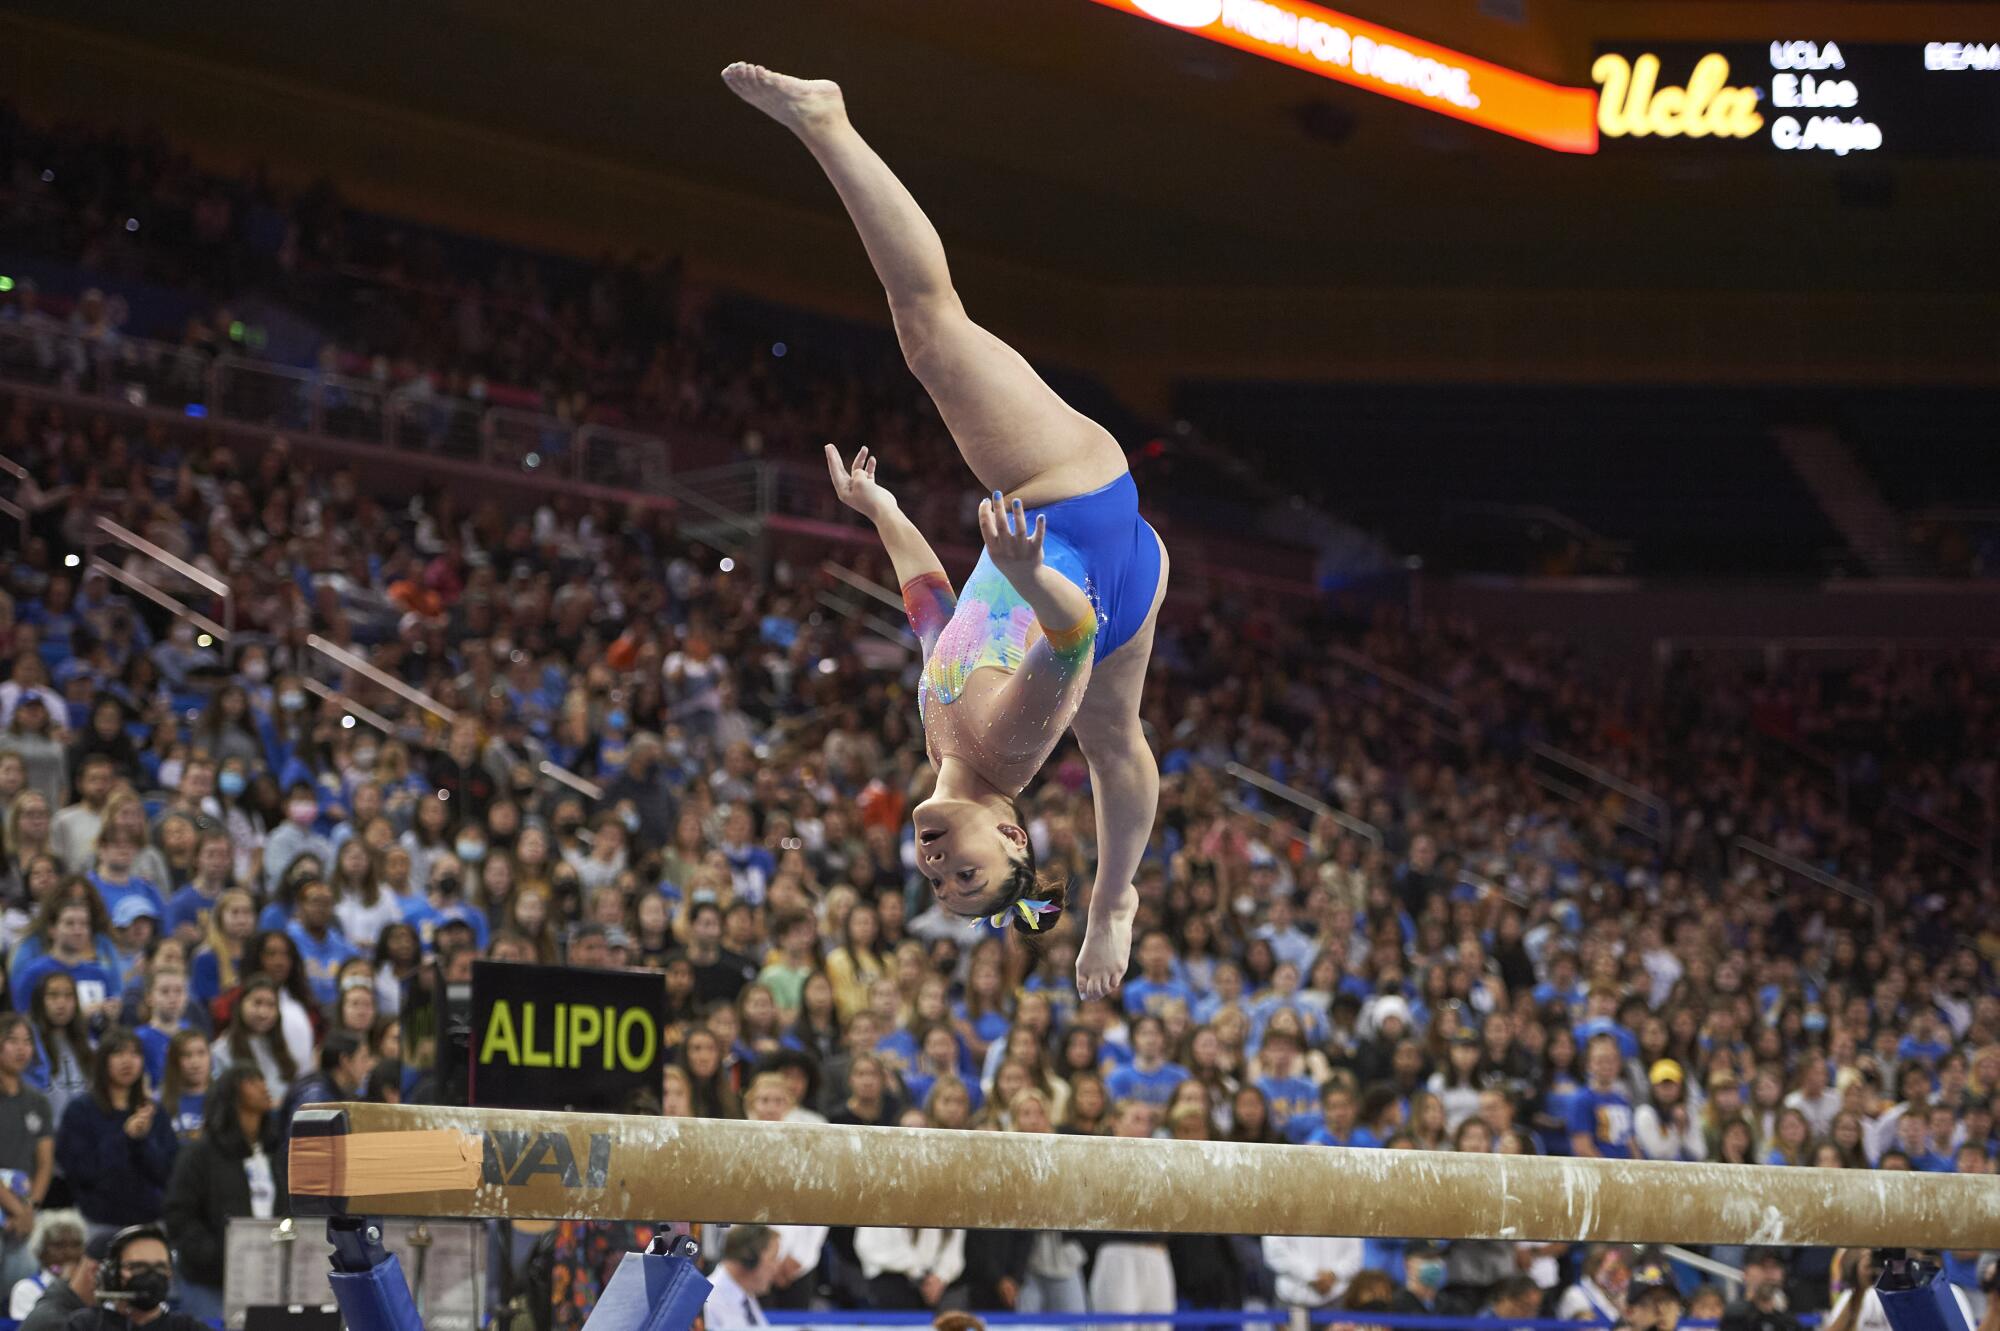 UCLA gymnast Ciena Alipio competes on the beam during a meet against Oregon State